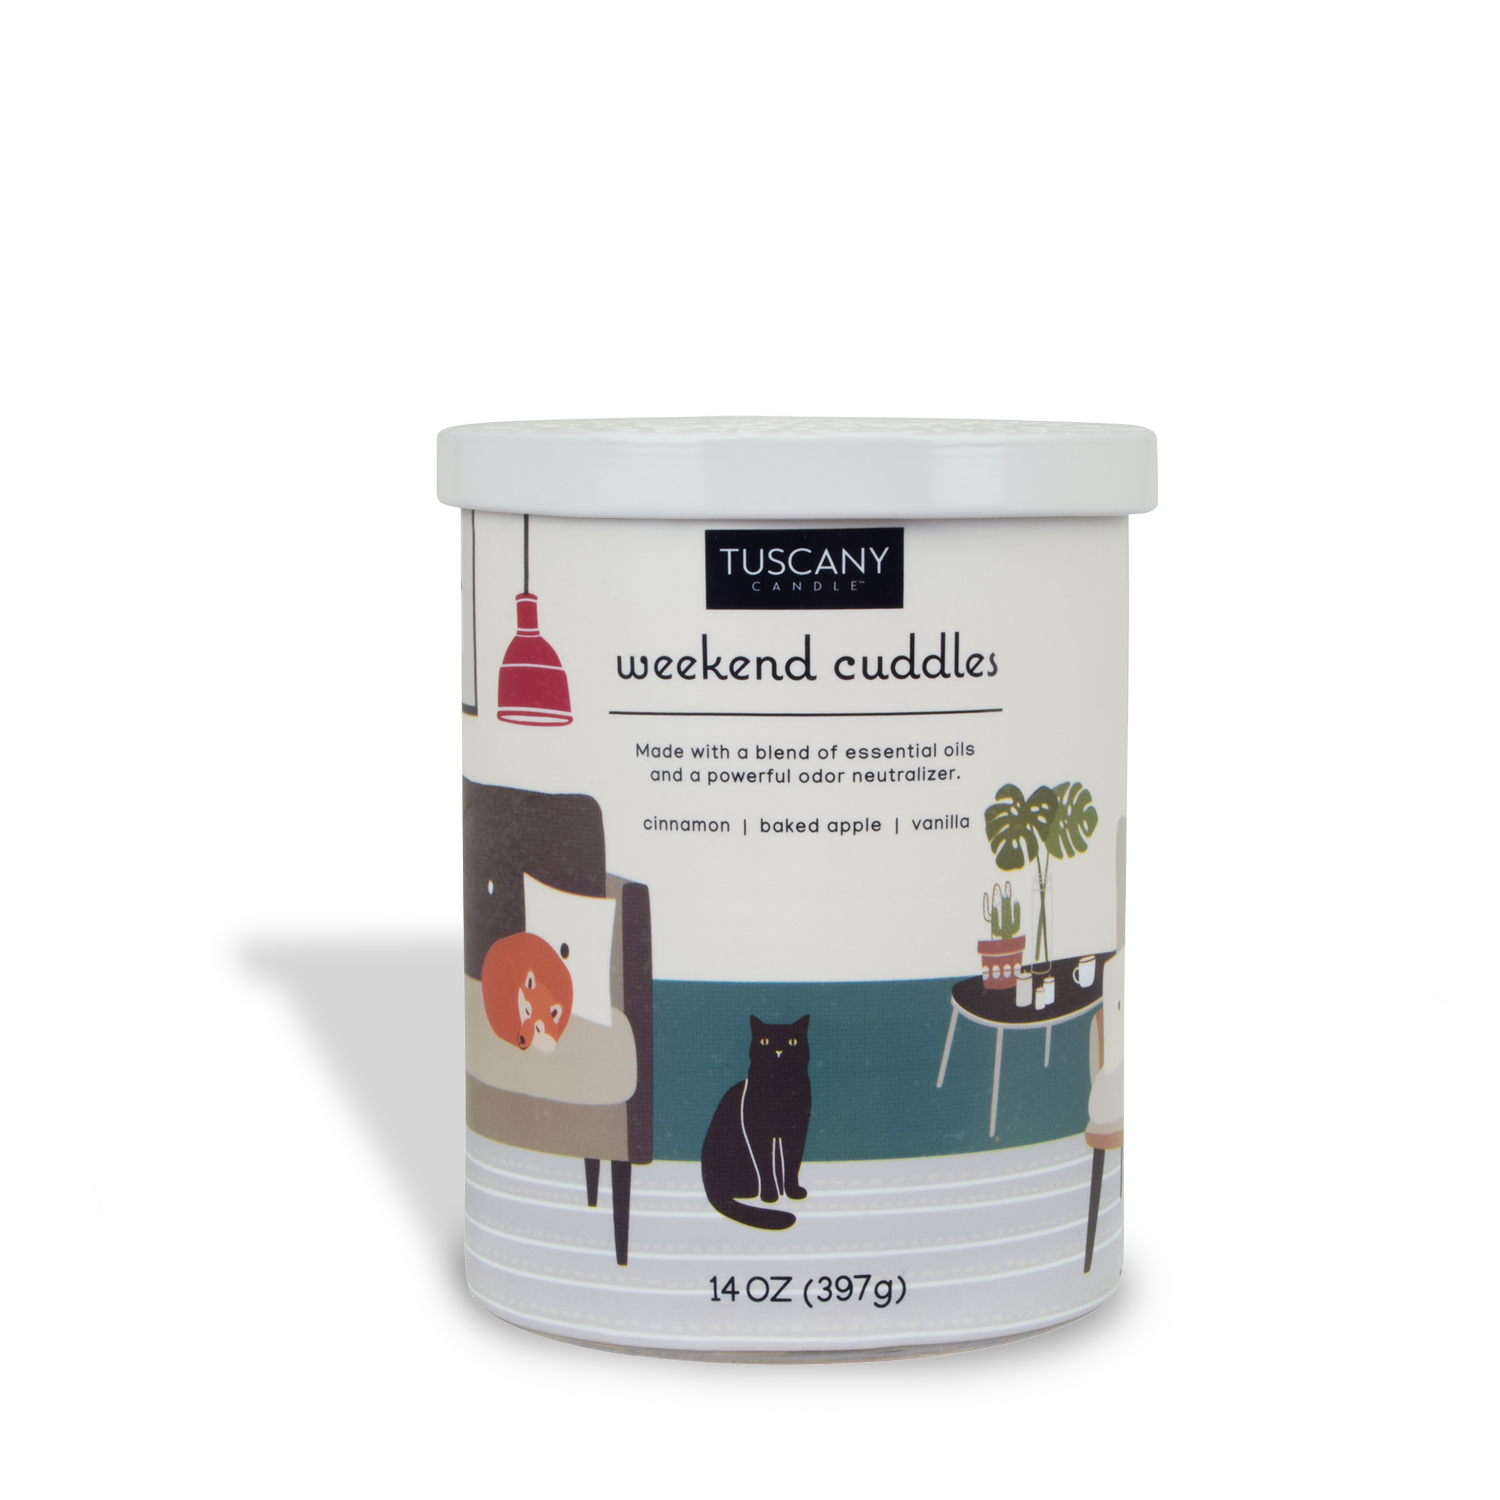 Tuscany Candle's Weekend Cuddles Scented Jar Candle in a tin is the ideal solution for pet odor control. The candle contains enzymes that effectively neutralize odors, making it perfect for creating a fresh and inviting atmosphere in your home.